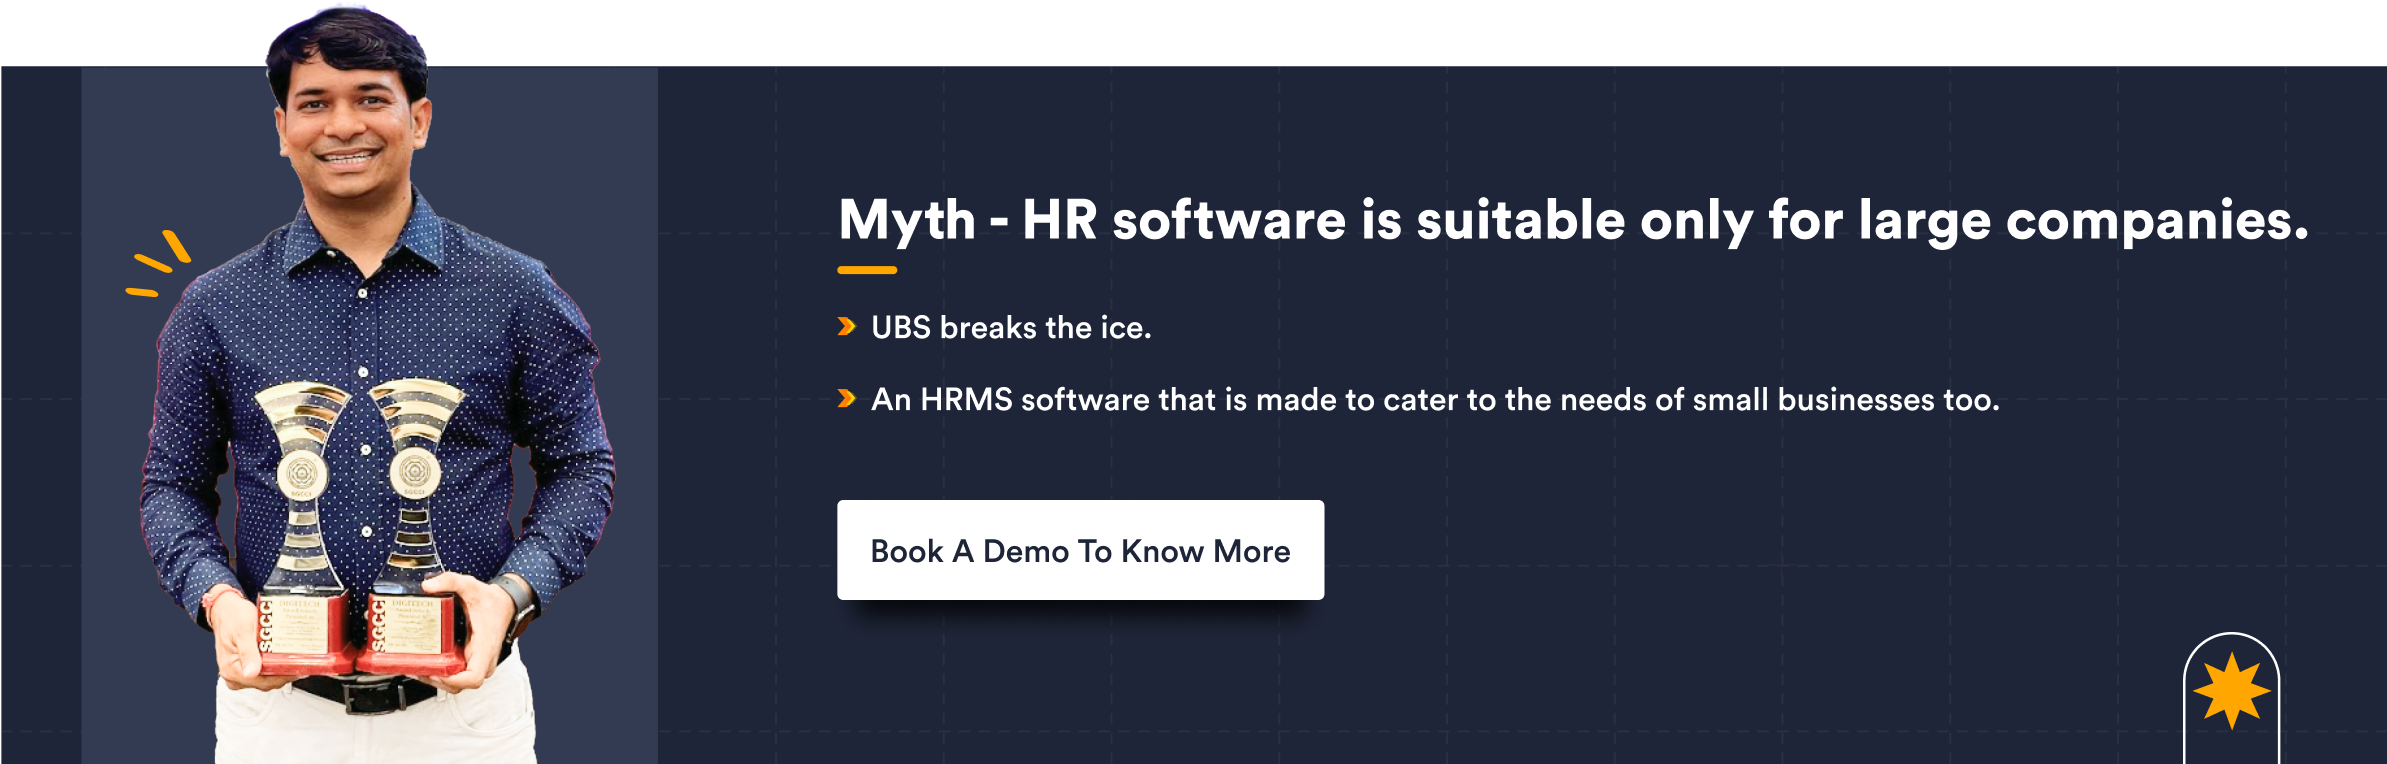 Myth HR software is suitable only for large companies.